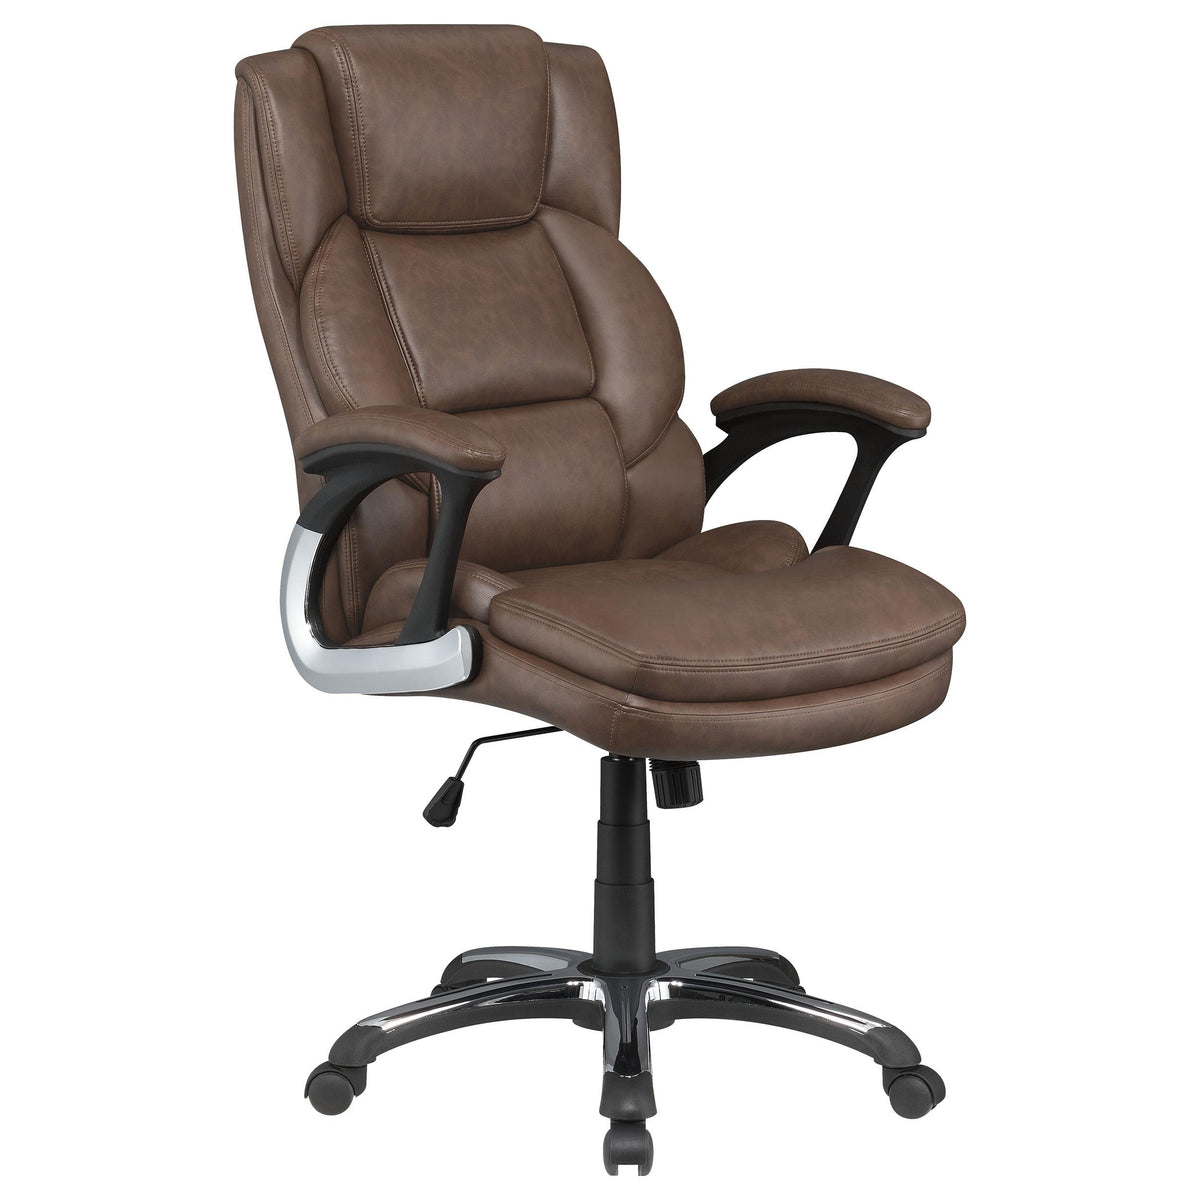 Nerris Adjustable Height Office Chair with Padded Arm Brown and Black Nerris Adjustable Height Office Chair with Padded Arm Brown and Black Half Price Furniture